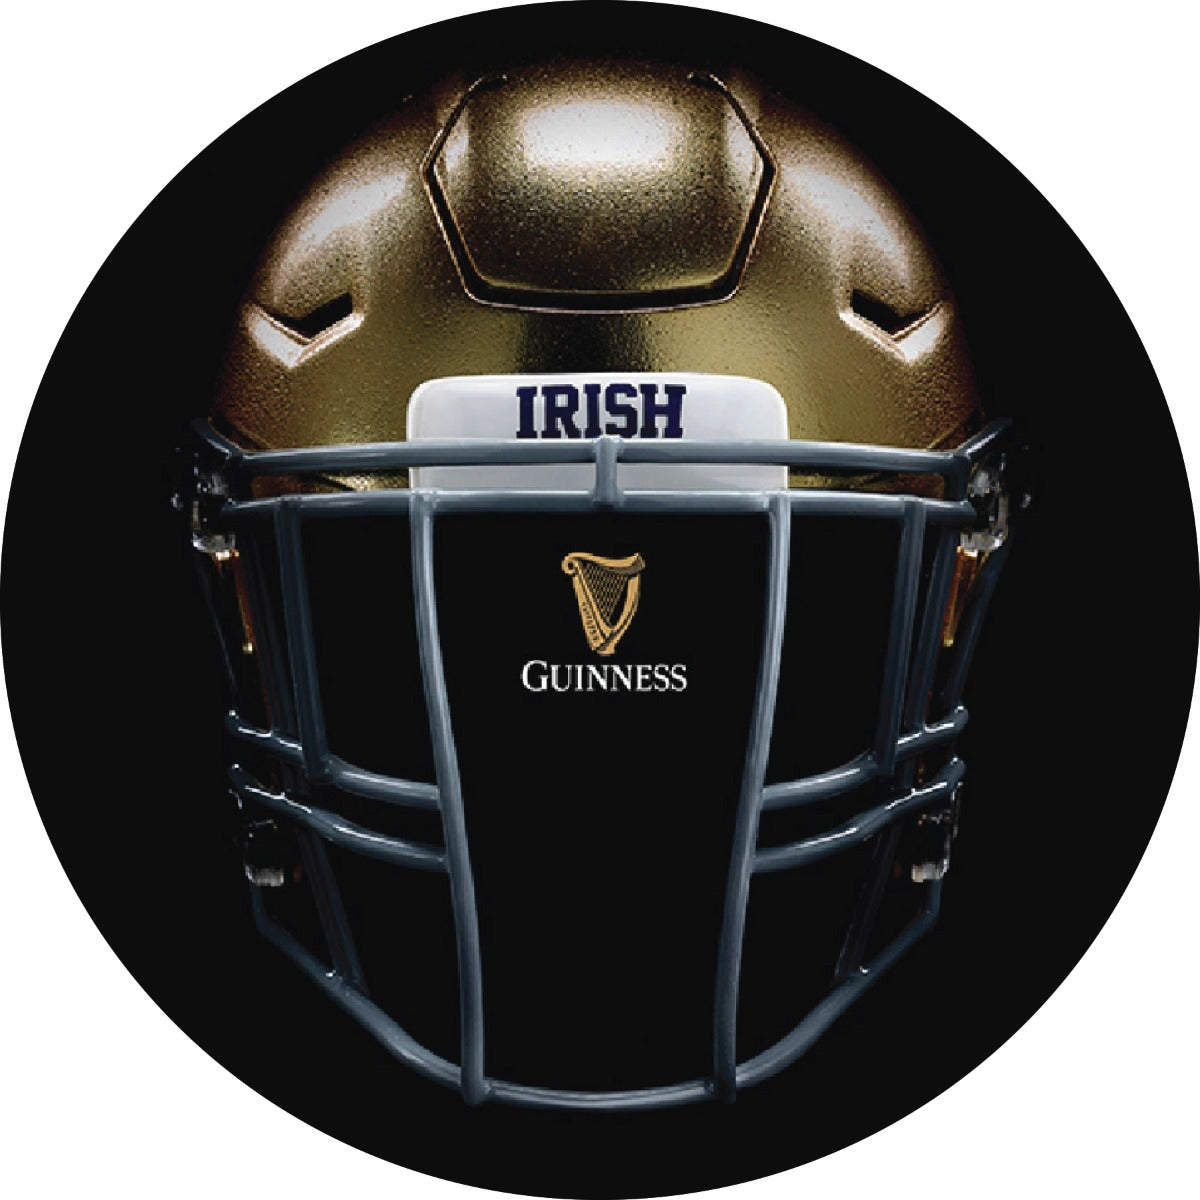 A Notre Dame Helmet Pub Table with Round Base, adorned with a Guinness logo, displayed on a black background.